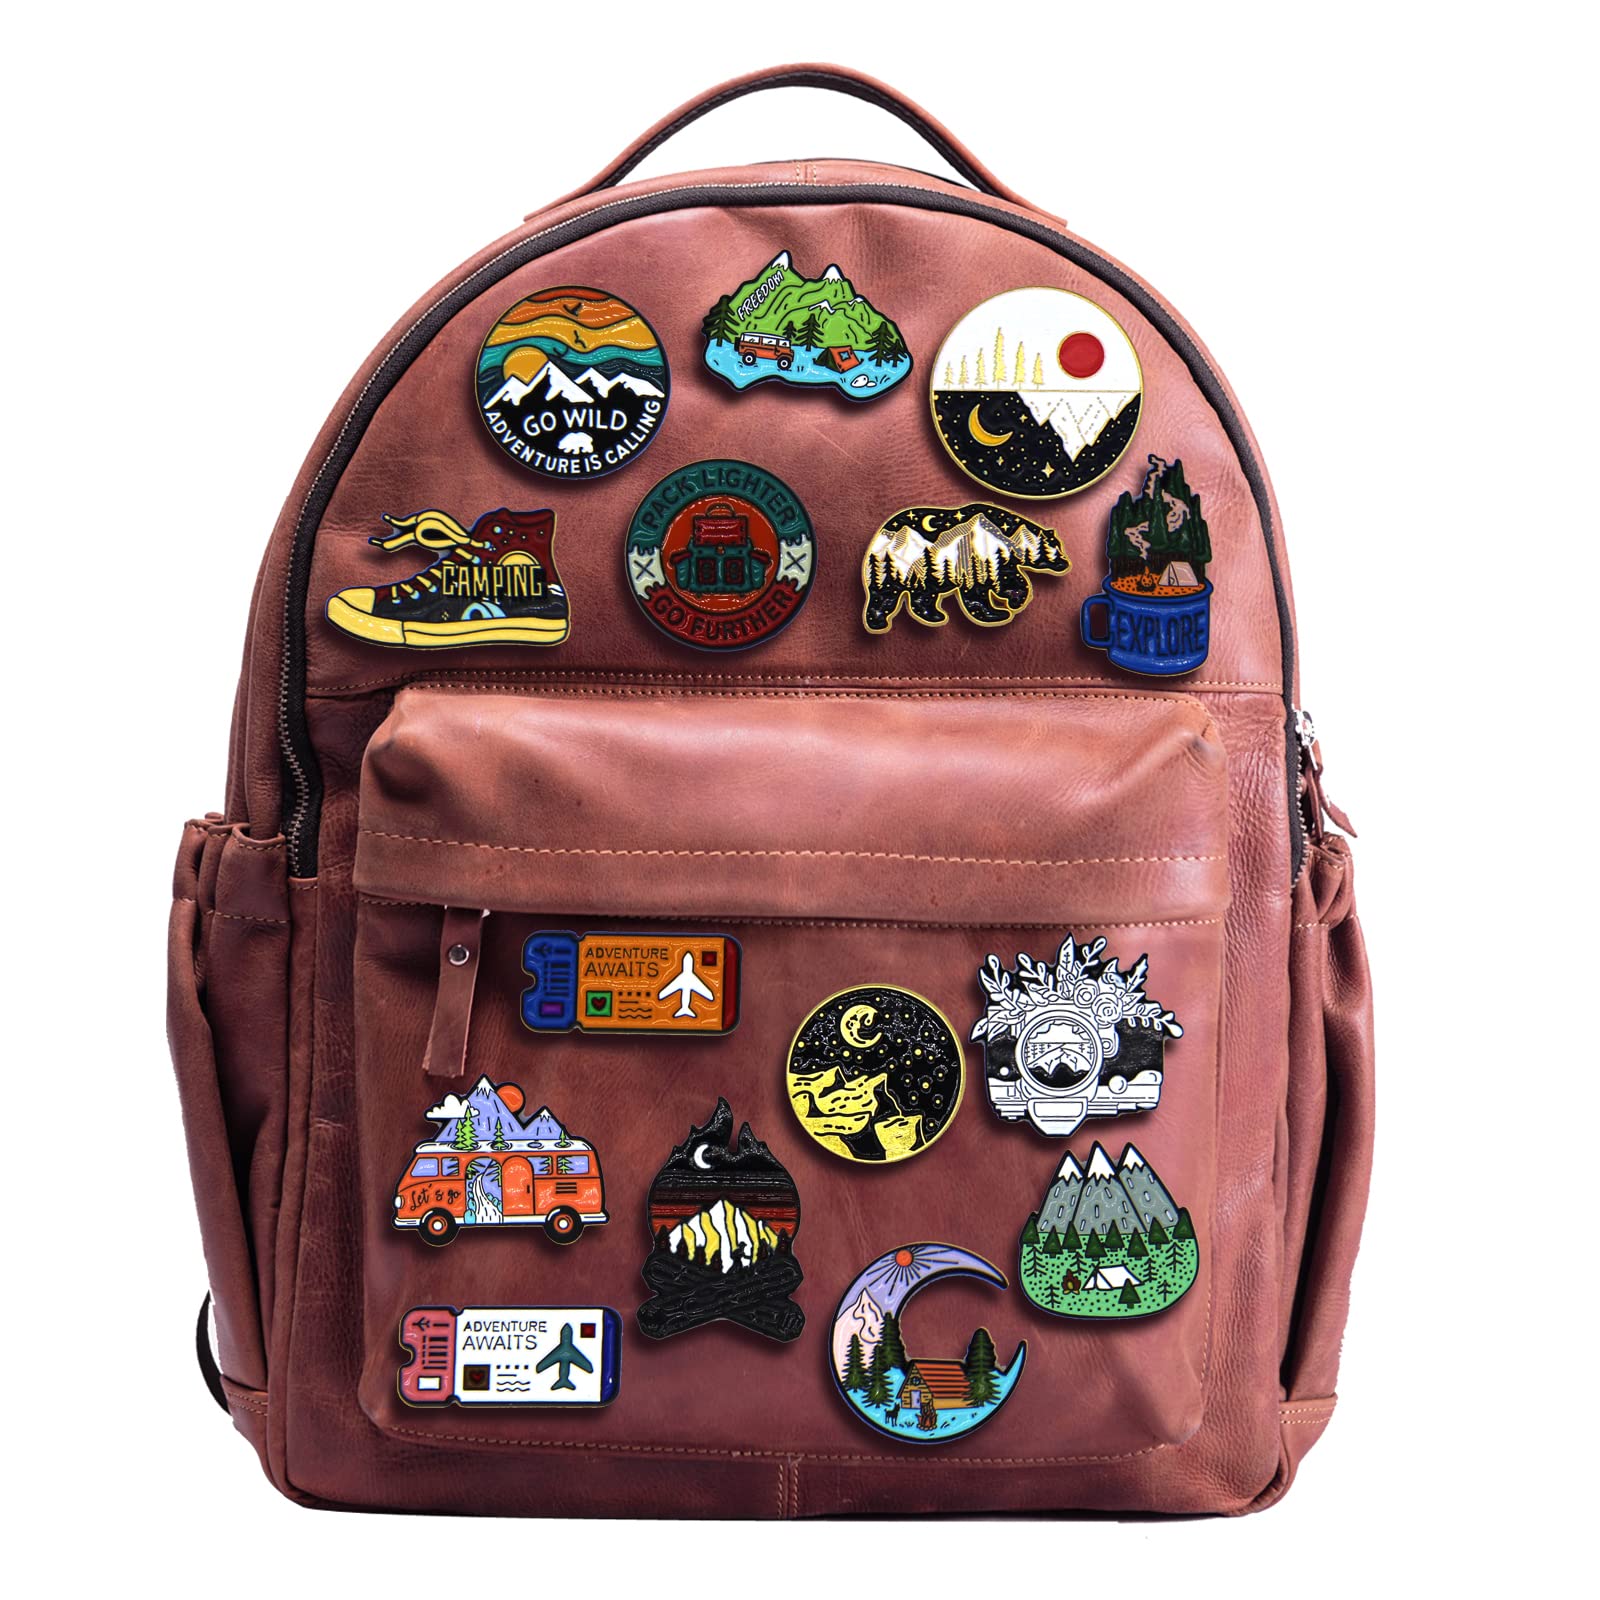 How To Keep Pins On Backpack